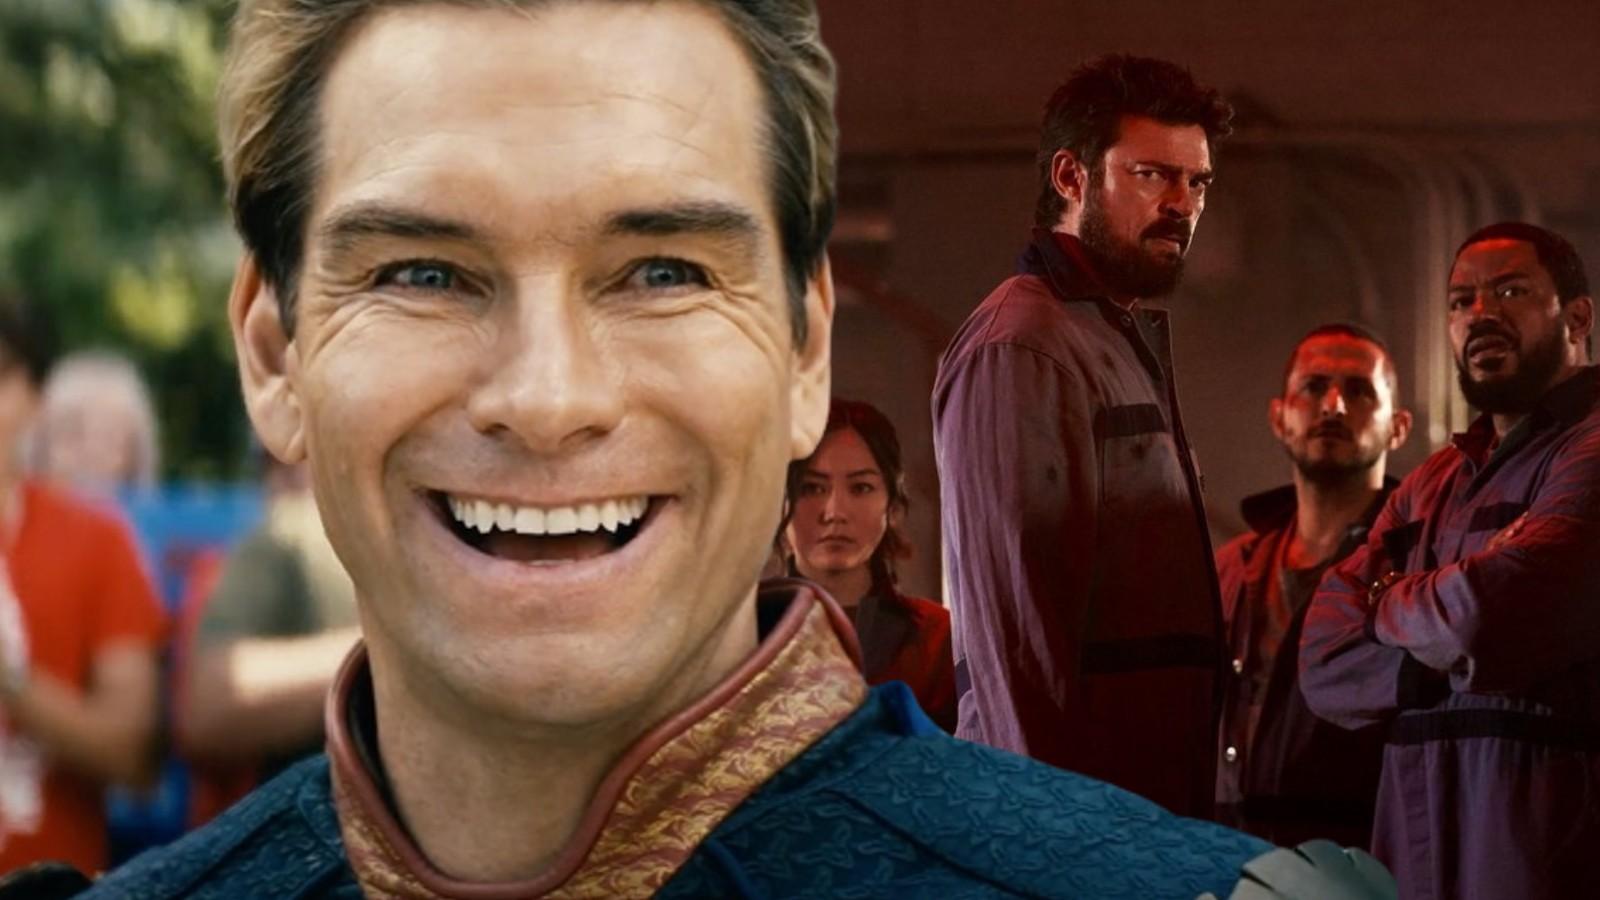 Homelander and the cast of The Boys, who are returning for Season 4